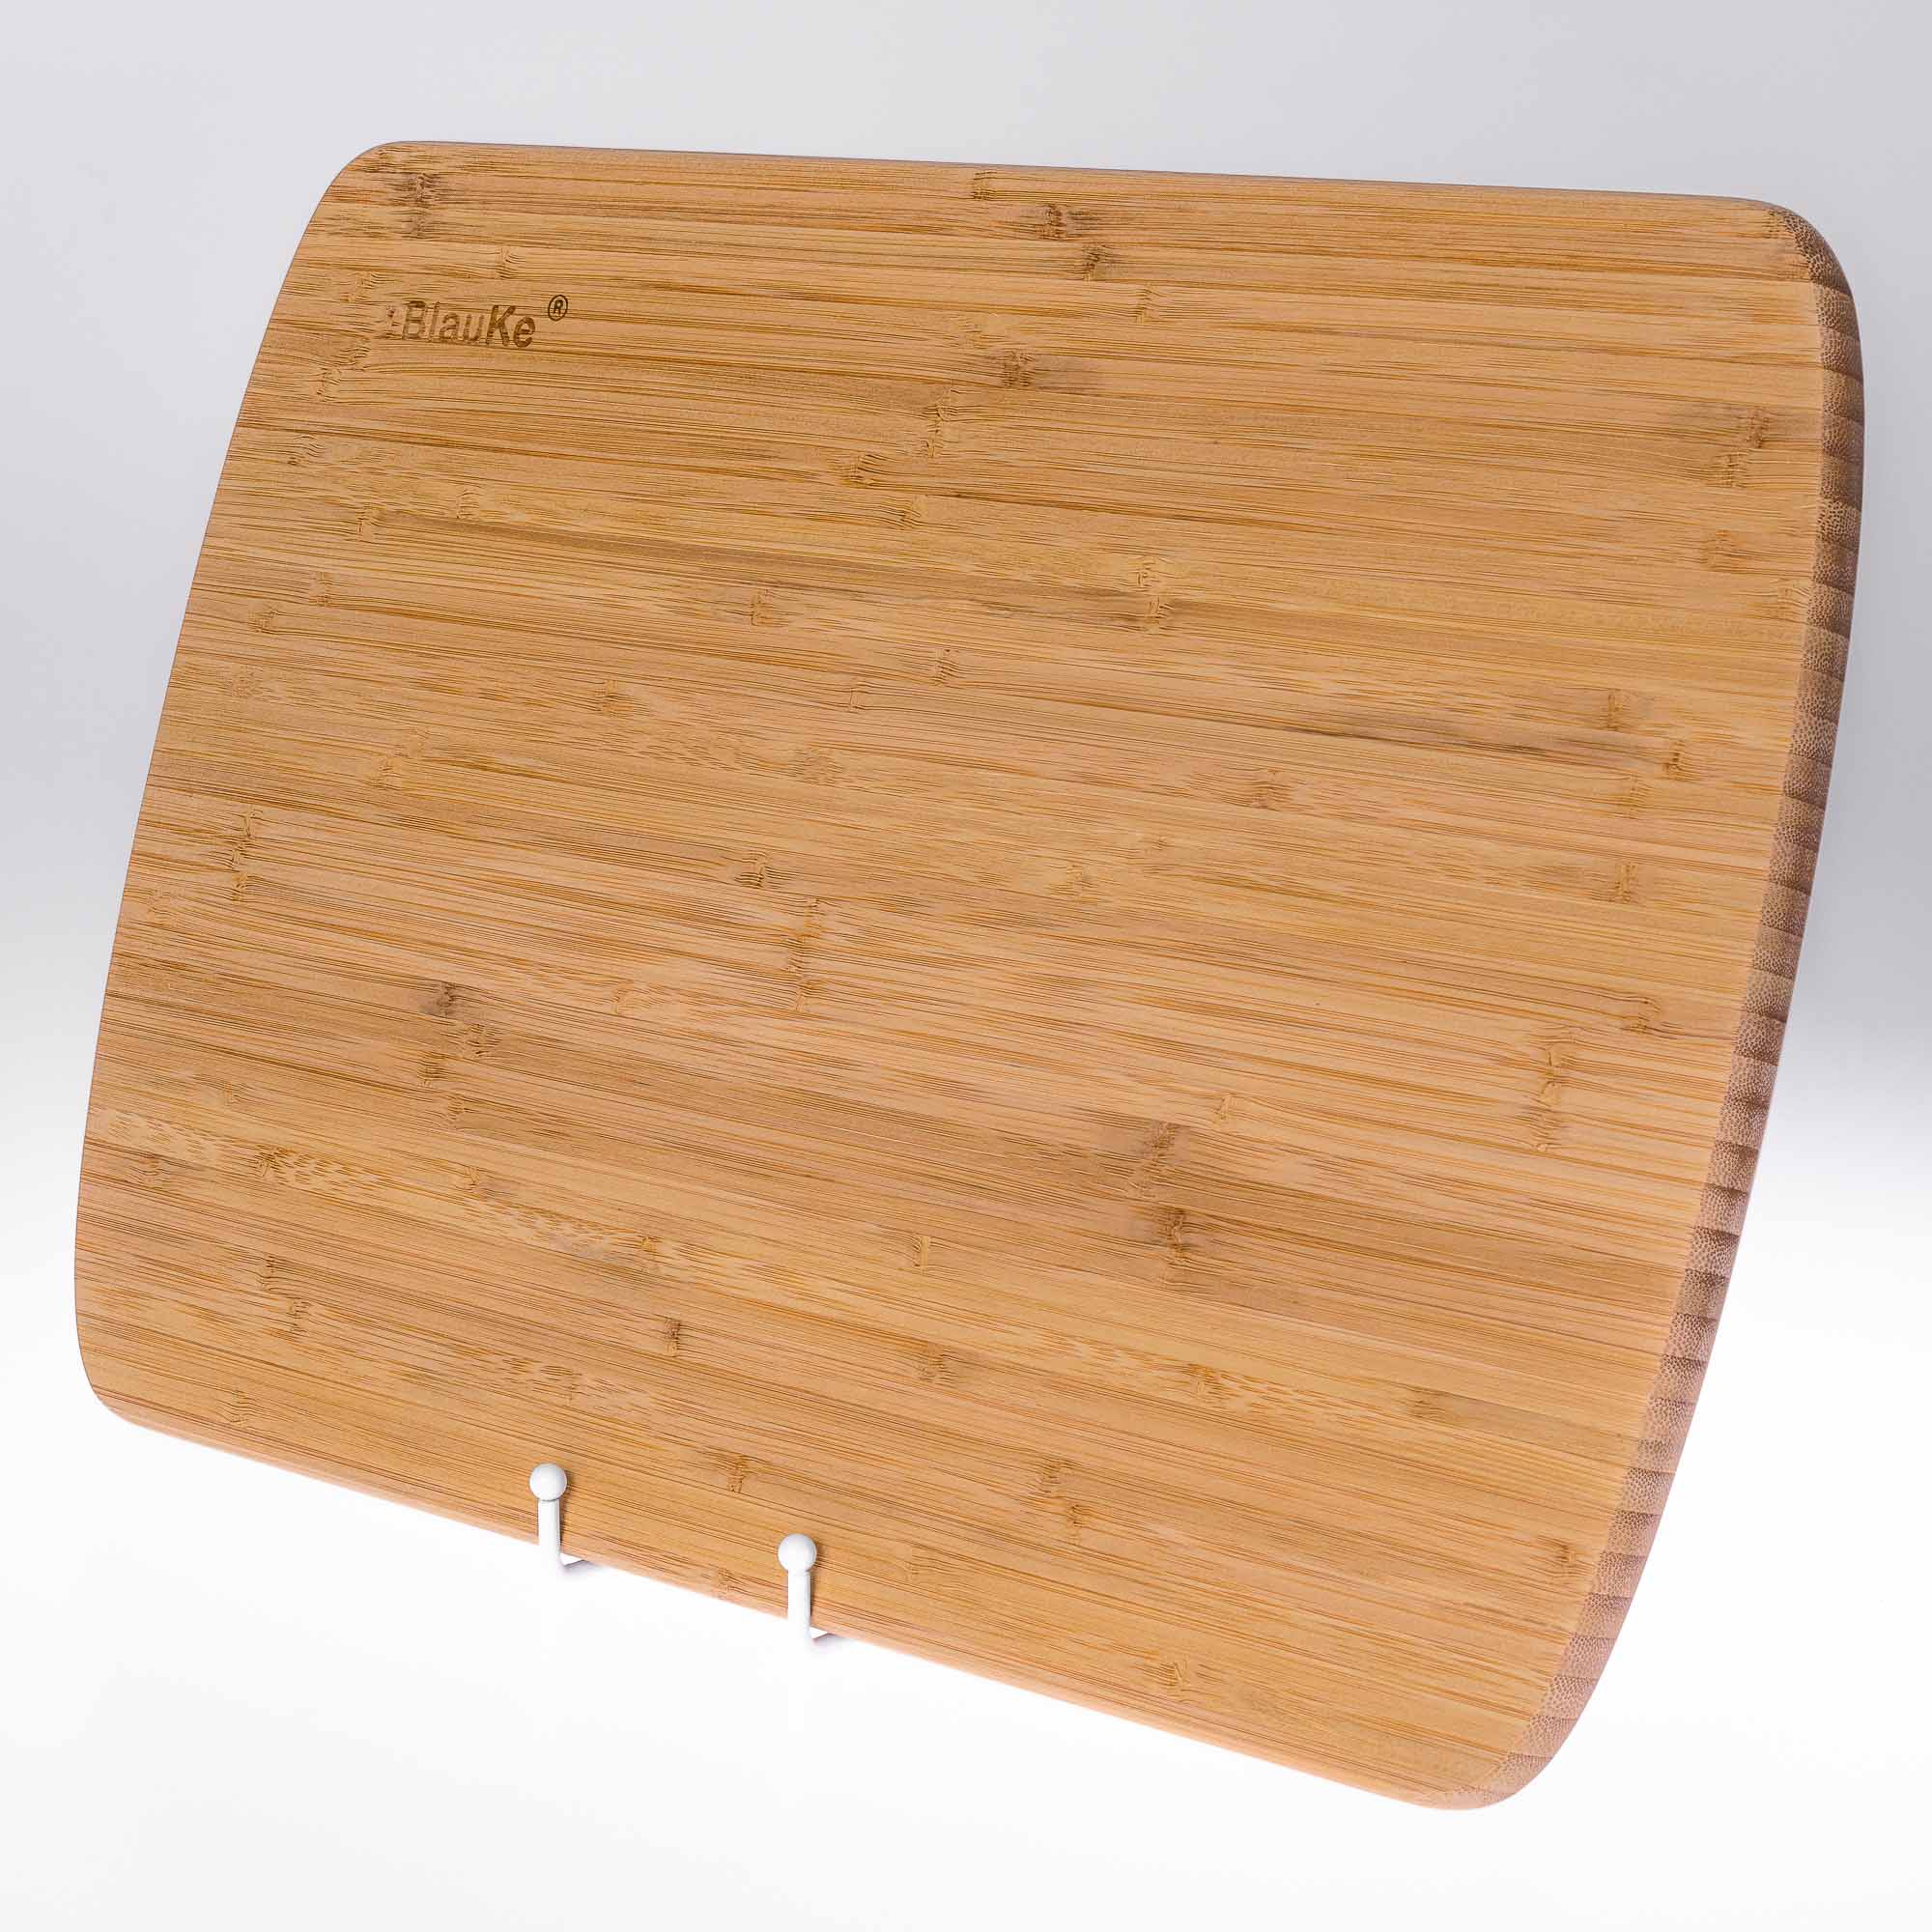 Extra Large Wood Cutting Board 18x12 inch - Butcher Block with Juice Groove, Serving Tray - Wooden Chopping Board for Kitchen